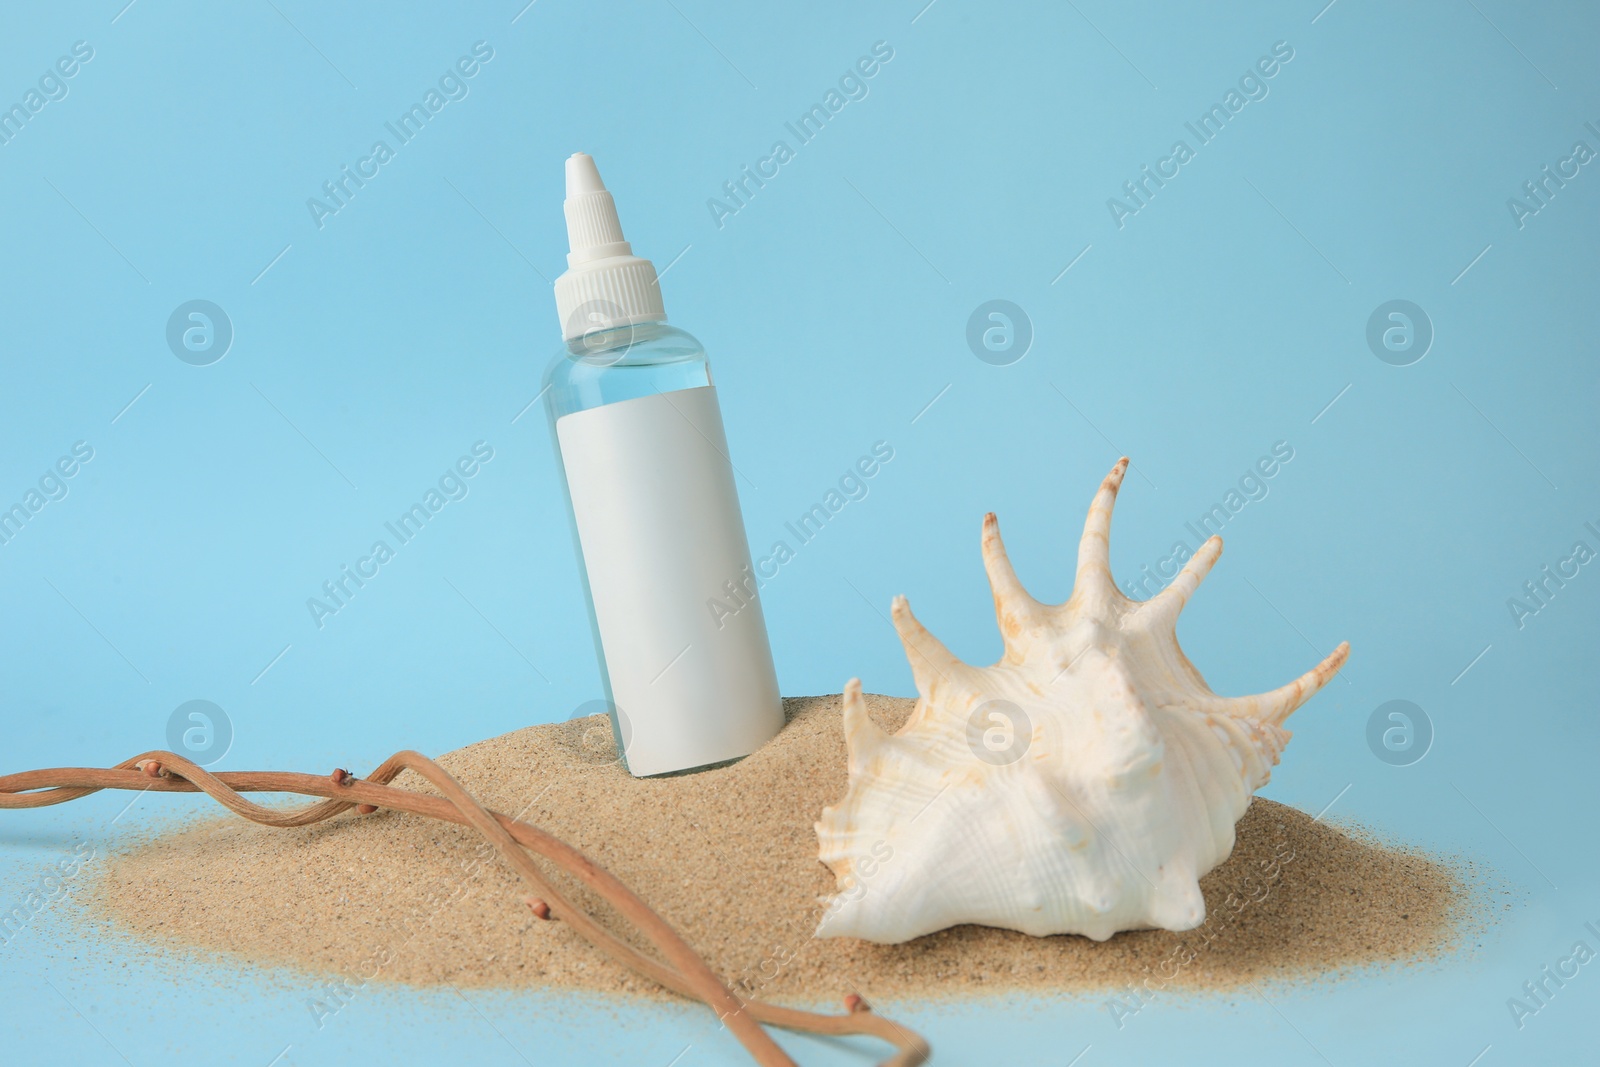 Photo of Bottle with serum, shell and branches on sand against light blue background. Cosmetic product